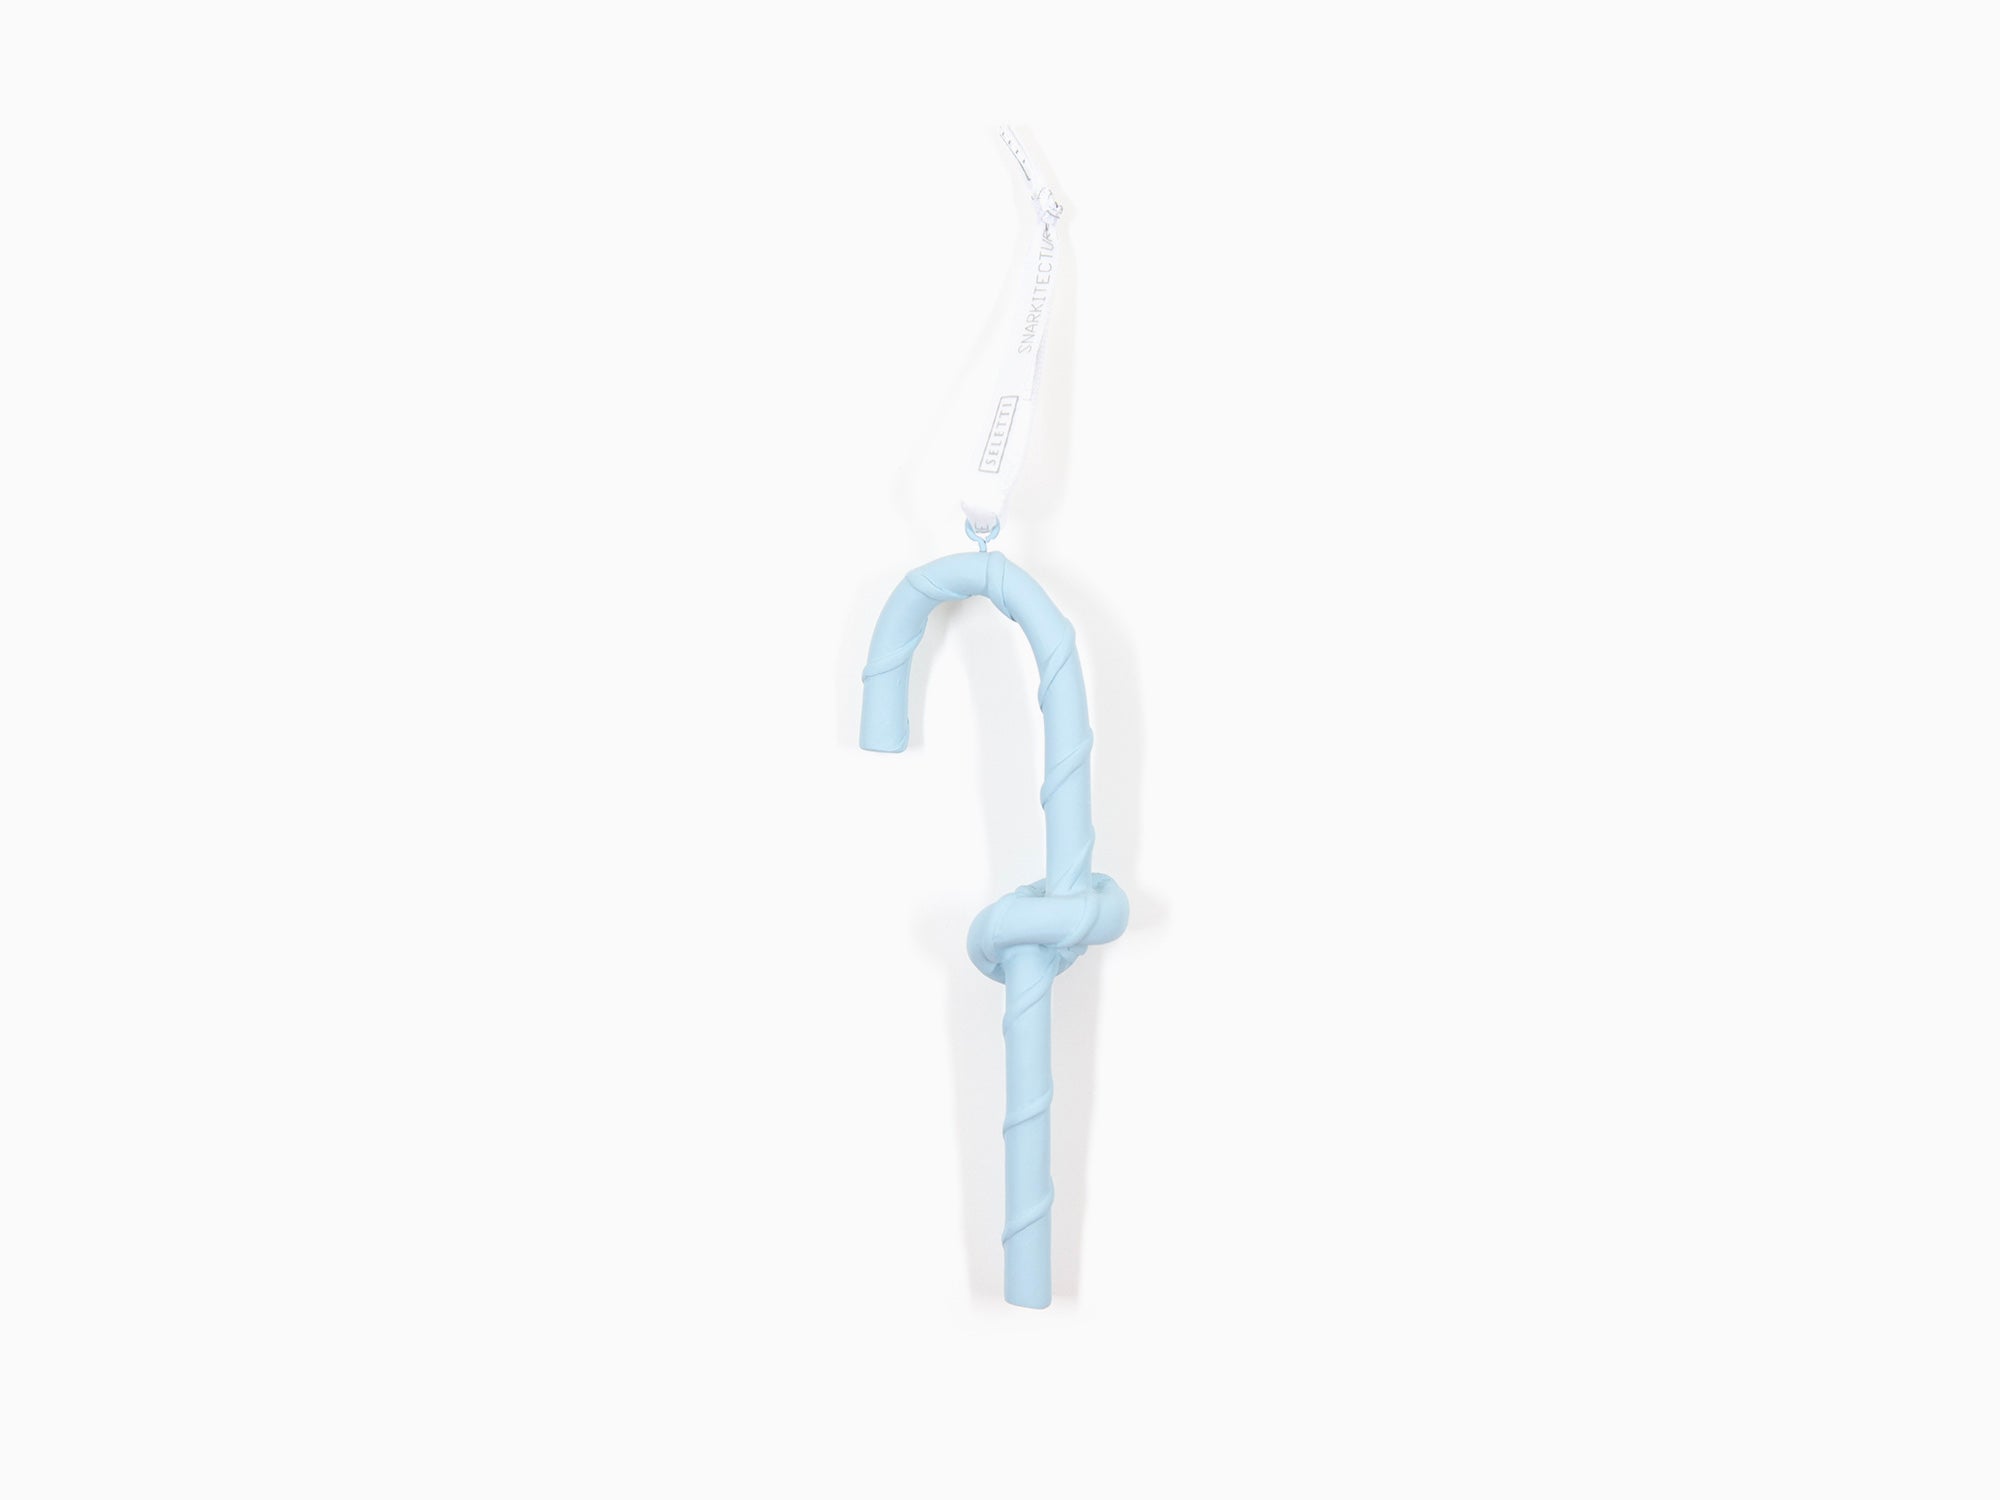 Snarkitecture x Seletti - Light Blue Candy Cane - sucre d'orge (Christmas ornament)